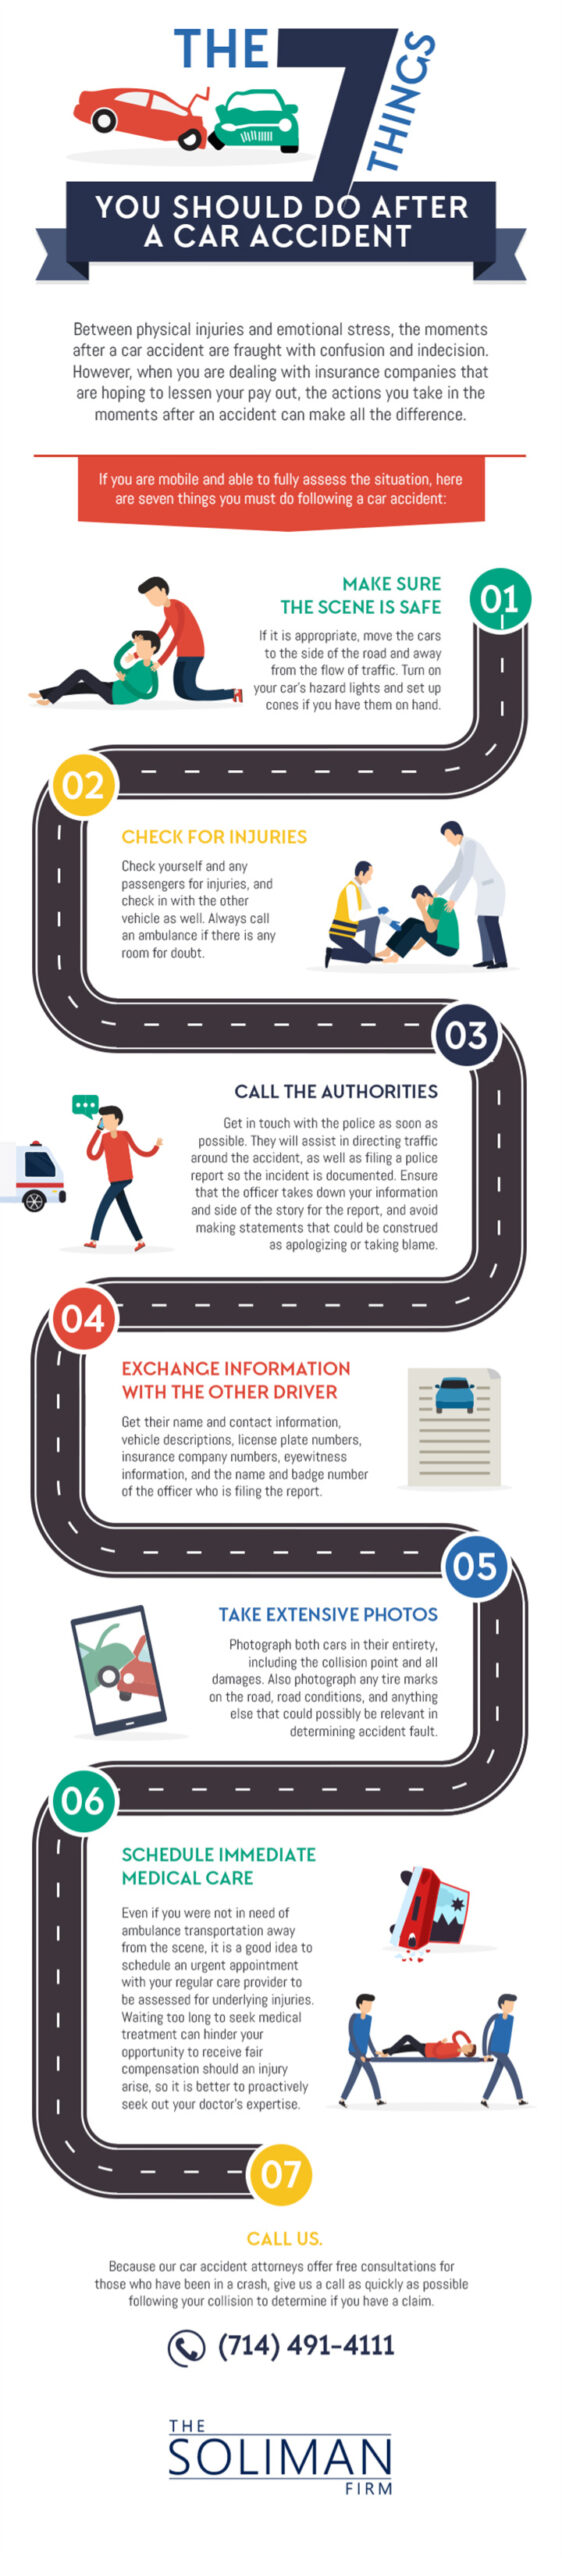 7 Things You Should Do After A Car Accident Infographic